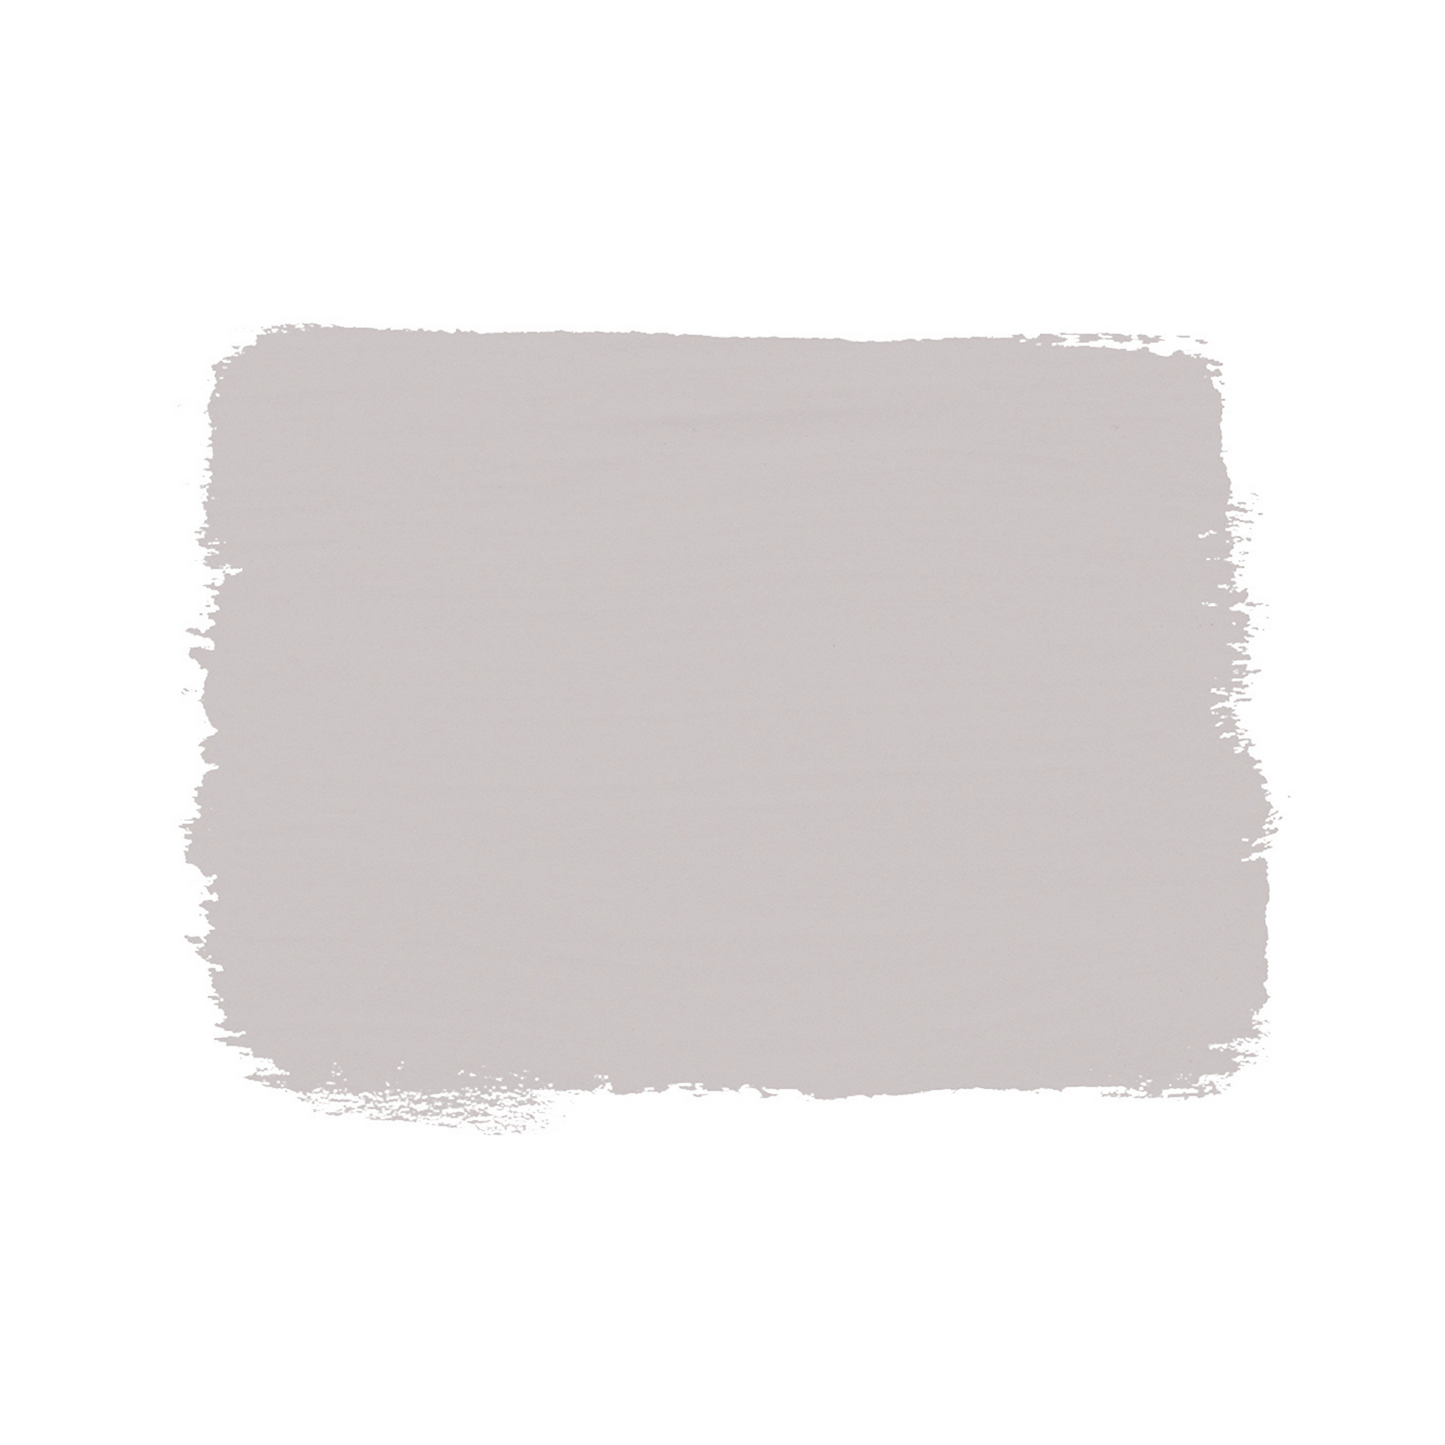 Swatch of  Chateau Grey Annie Sloan Chalk Paint